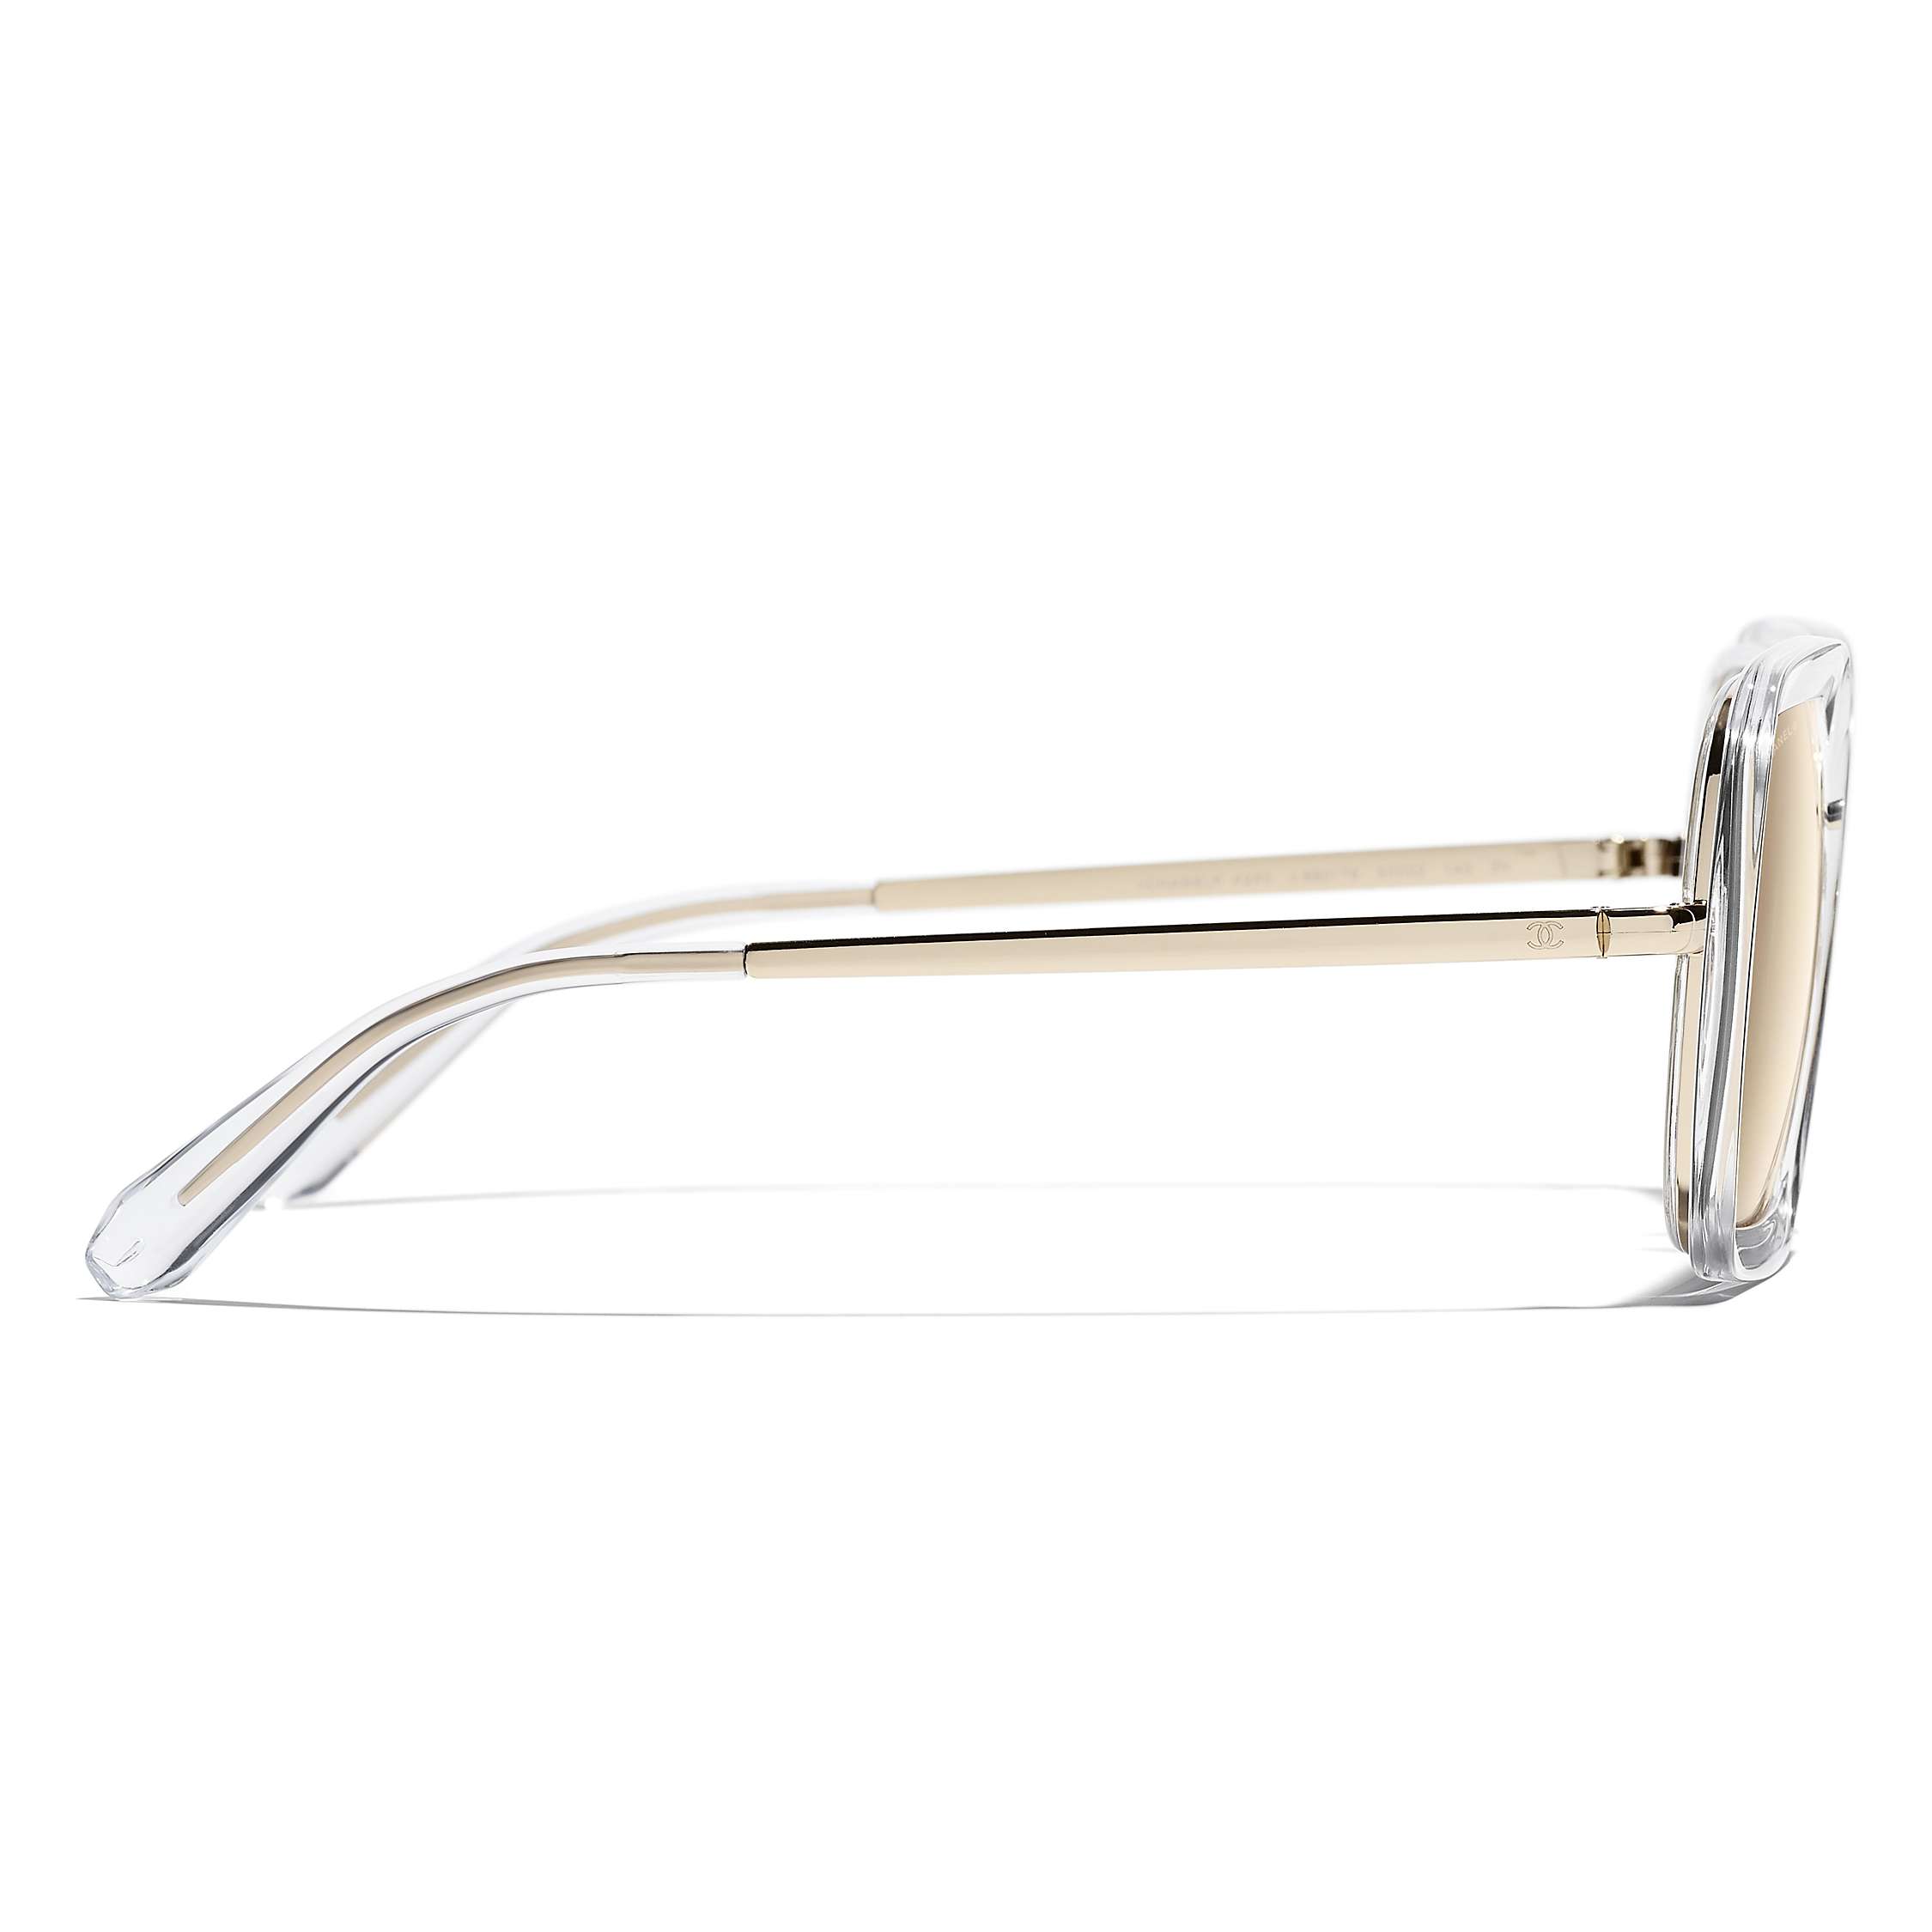 Buy CHANEL Square Sunglasses CH4240 Clear/Mirror Gold Online at johnlewis.com